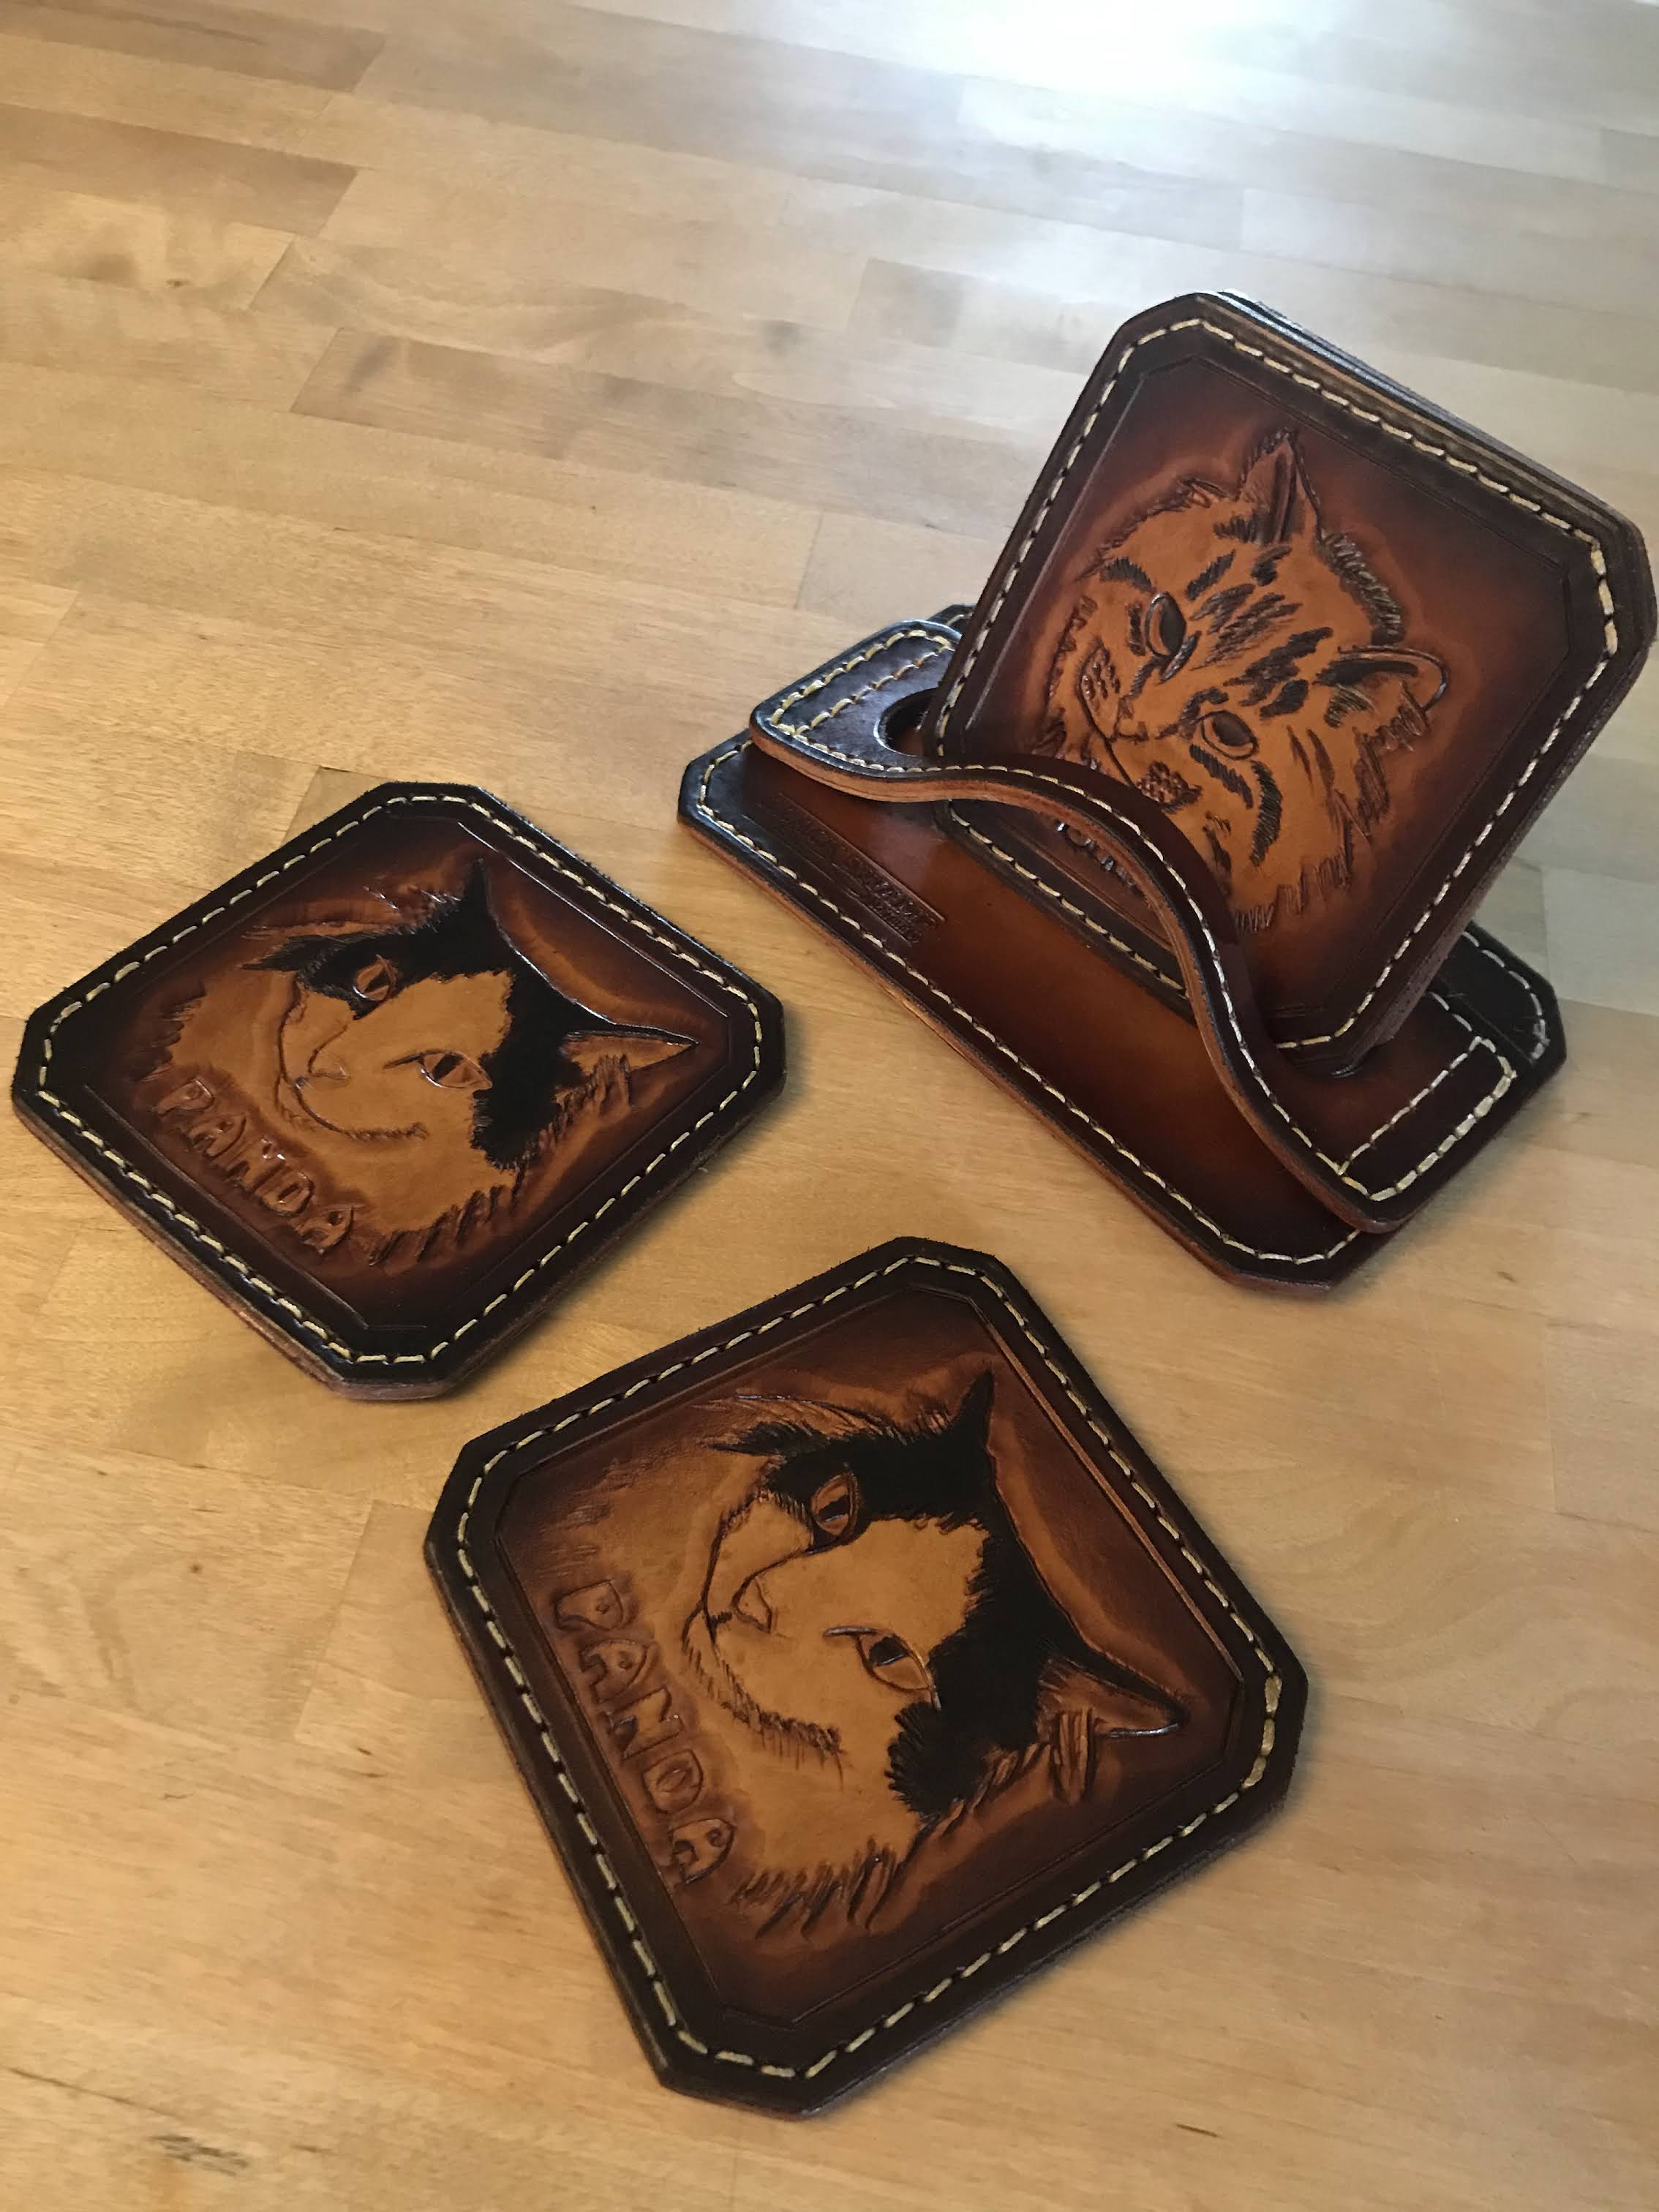 Customized Leather Drink Coasters